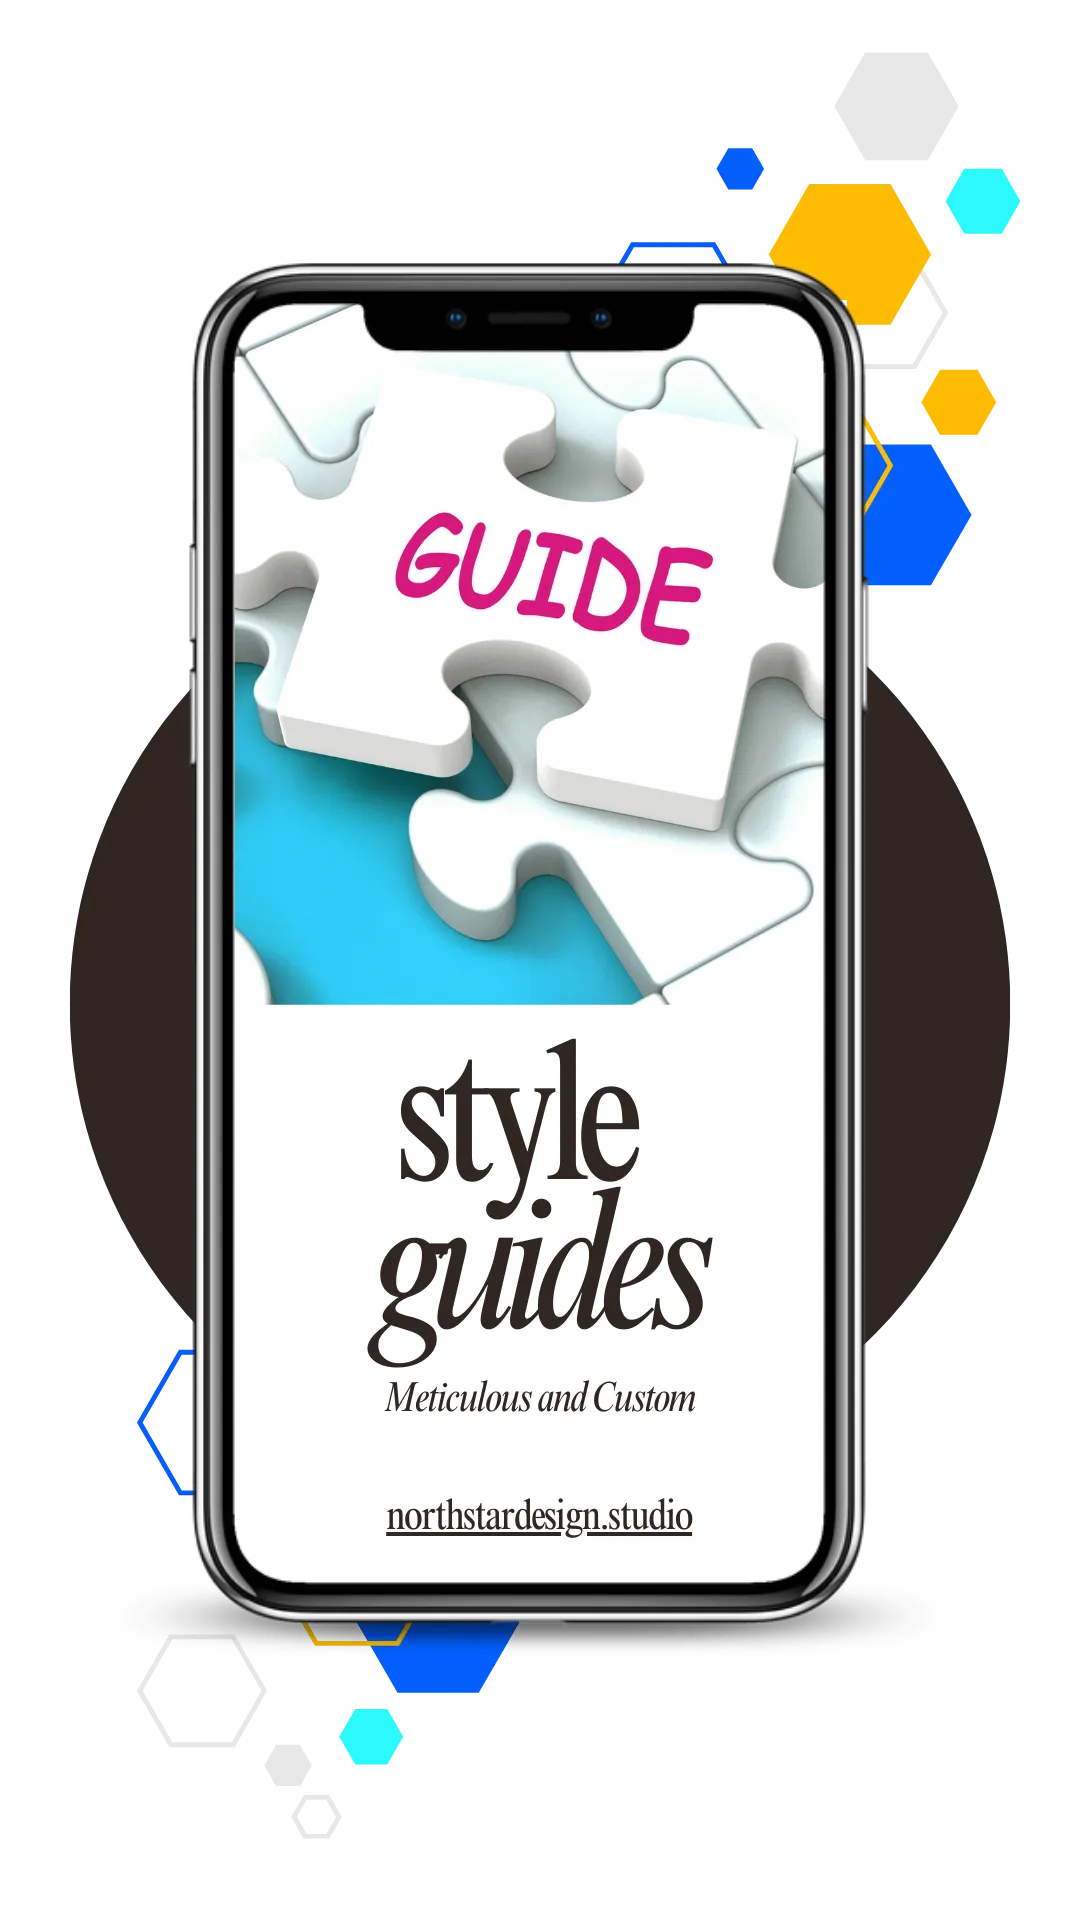 Style guides